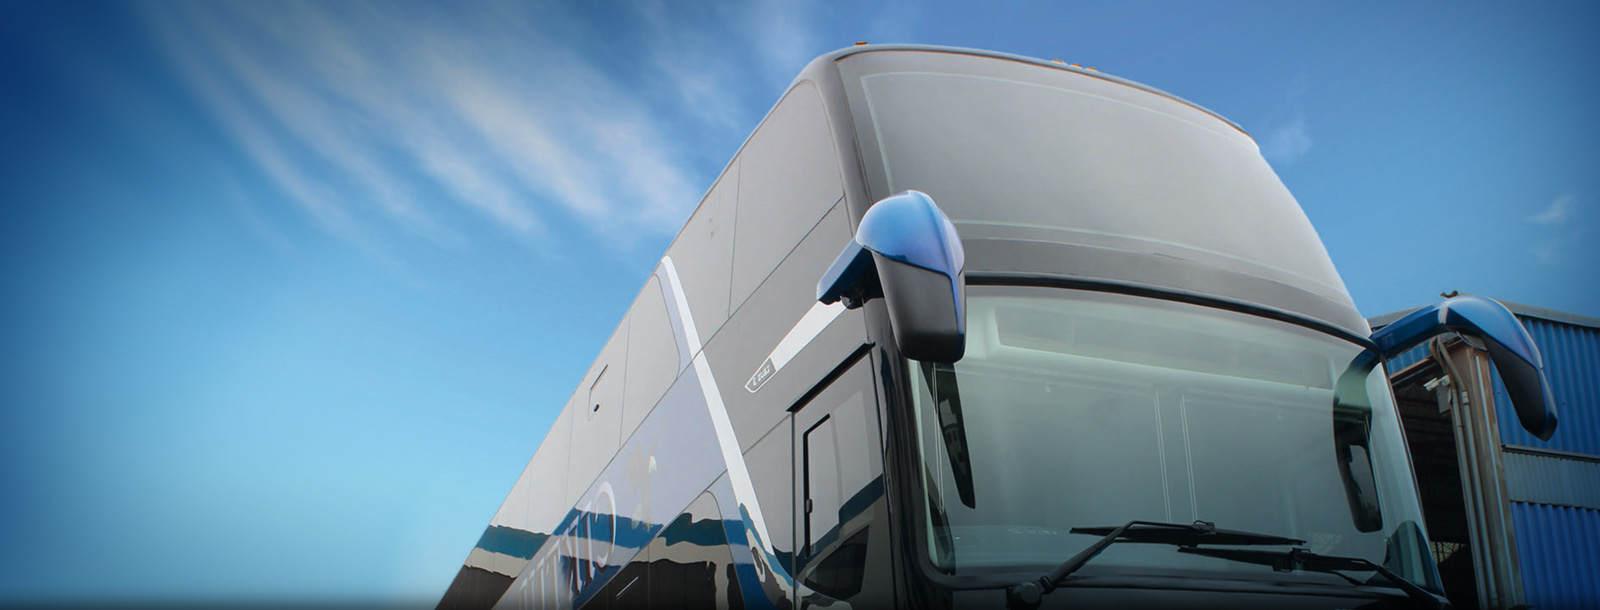 INMESA - Rearview mirrors, spare parts and accessories for buses and industrial vehicles